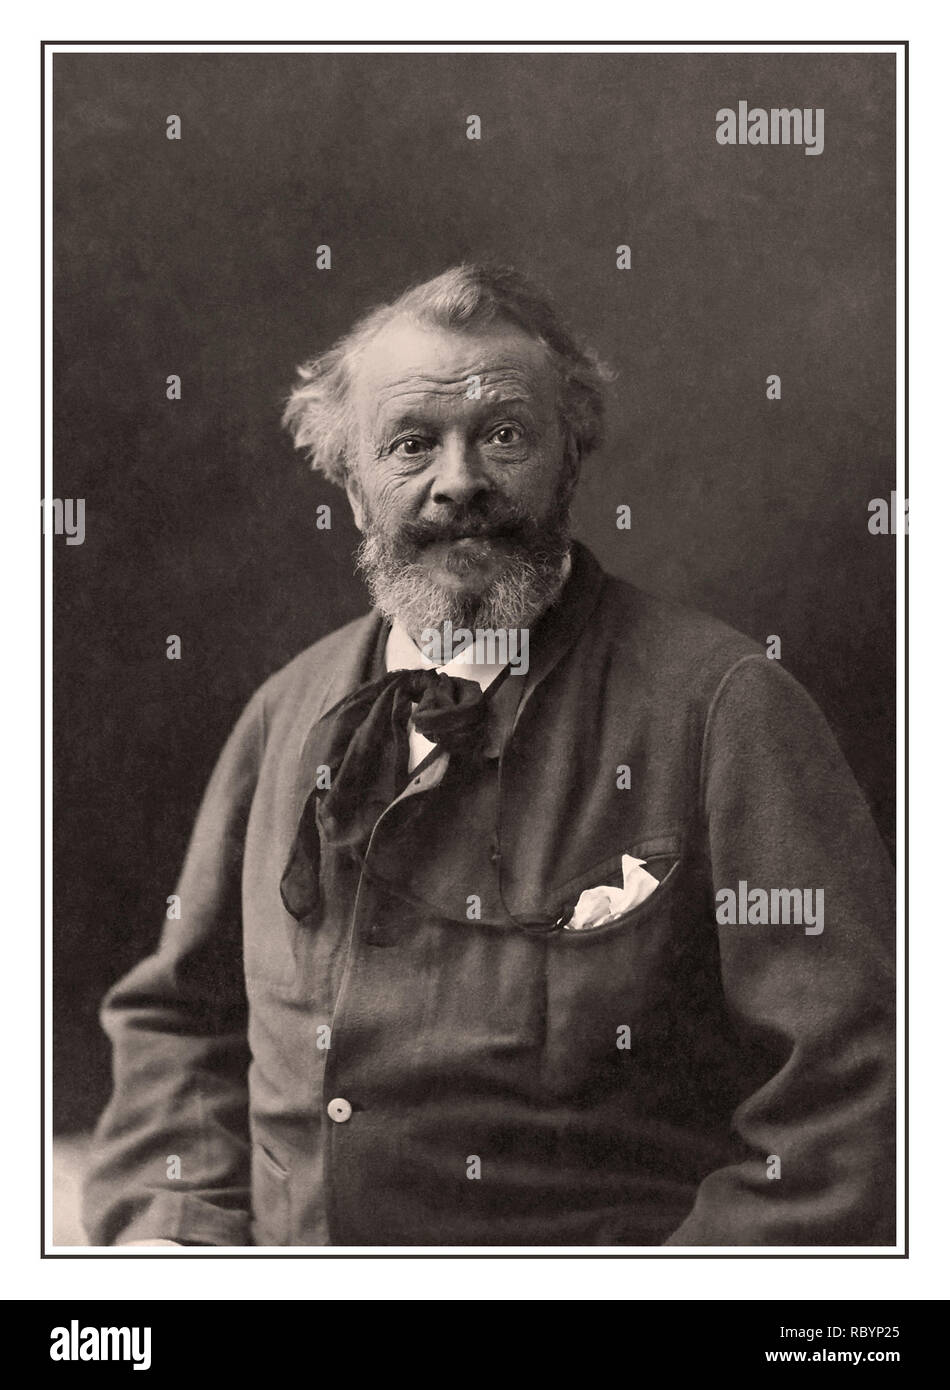 NADAR PHOTOGRAPHER FRANCE STUDIO PORTRAIT Gaspard-Félix Tournachon (6 April 1820 – 20 March 1910, known by the pseudonym Nadar, was a French photographer, caricaturist, journalist, novelist, and balloonist (or, more accurately, proponent of manned flight). Occupation Photographer, caricaturist, journalist, novelist, balloonist, Known for being a Pioneer in photography Stock Photo